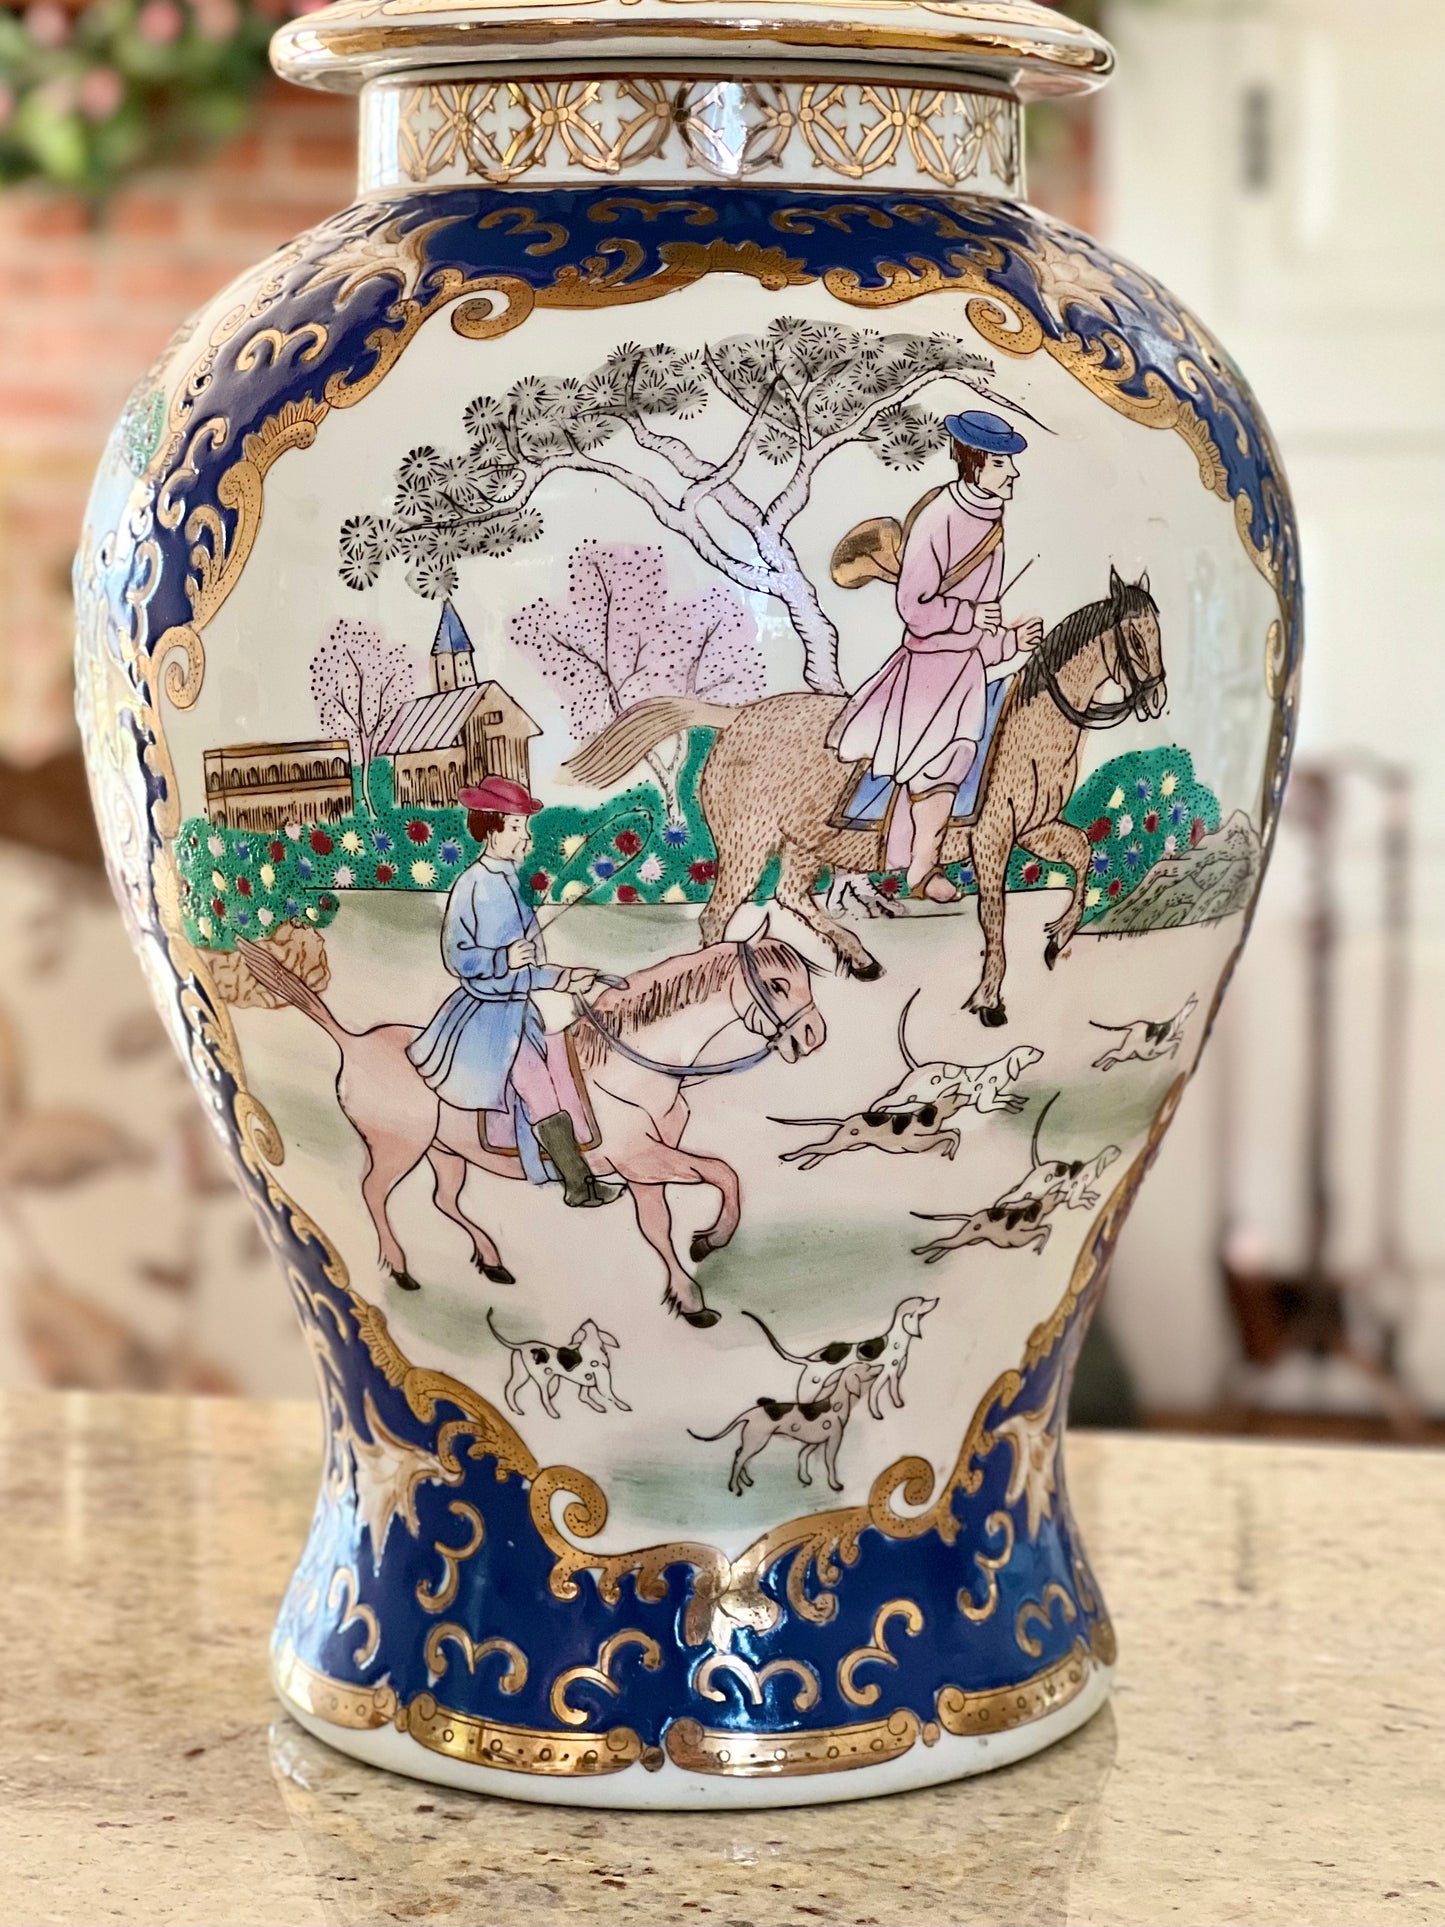 Vintage Chinese Porcelain Temple Jar with Hunt Scene, 14.5” tall - Excellent!